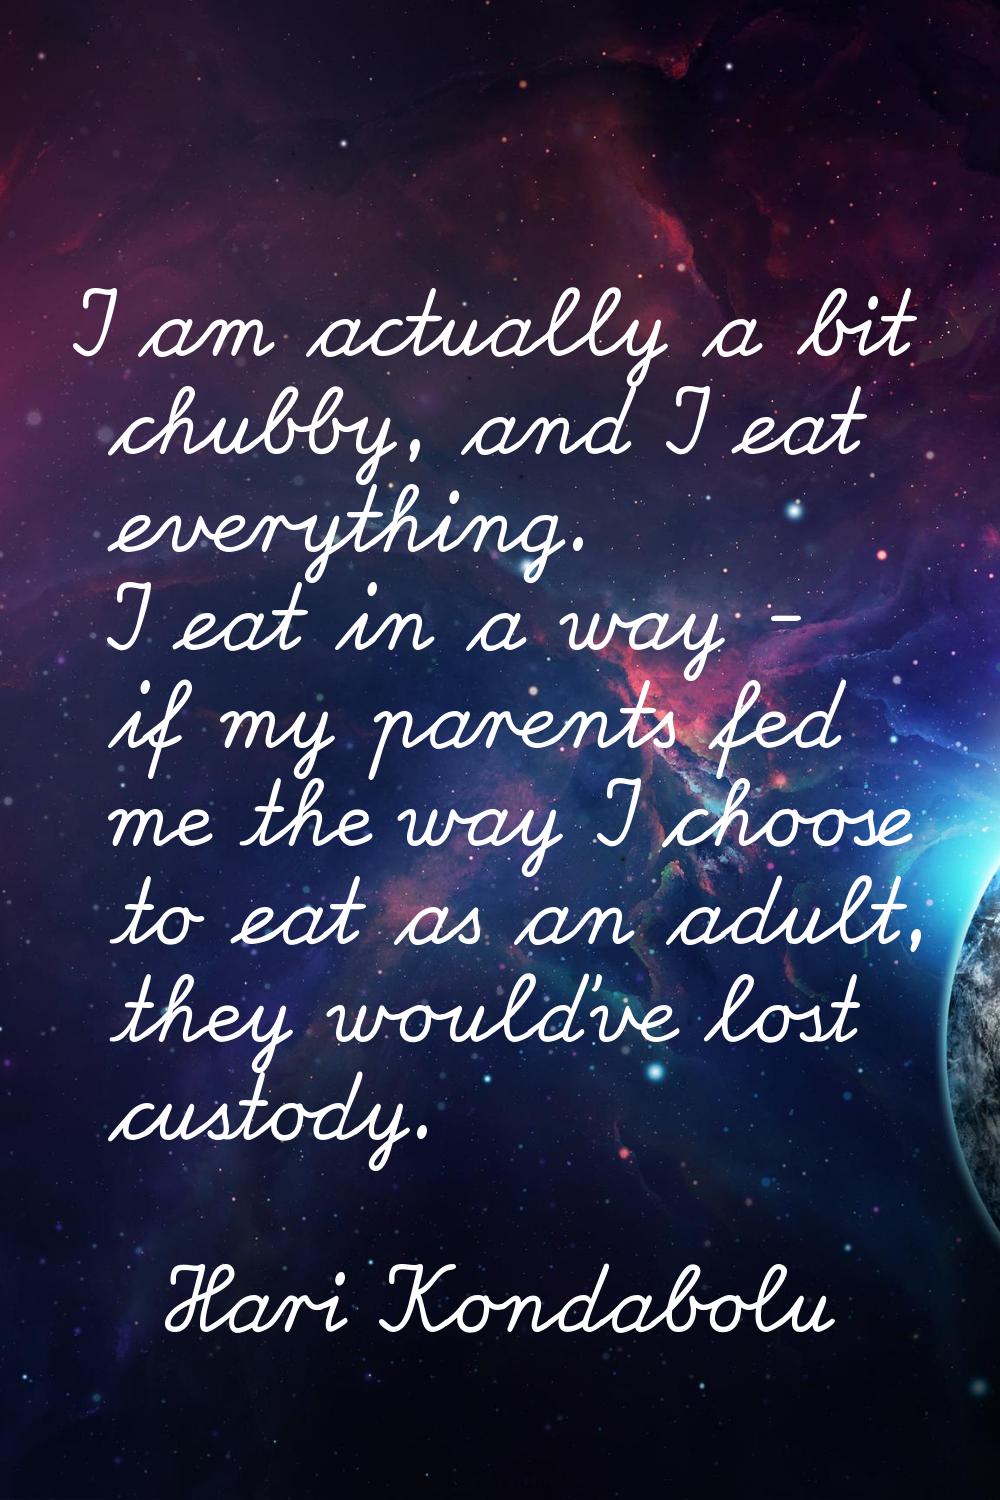 I am actually a bit chubby, and I eat everything. I eat in a way - if my parents fed me the way I c